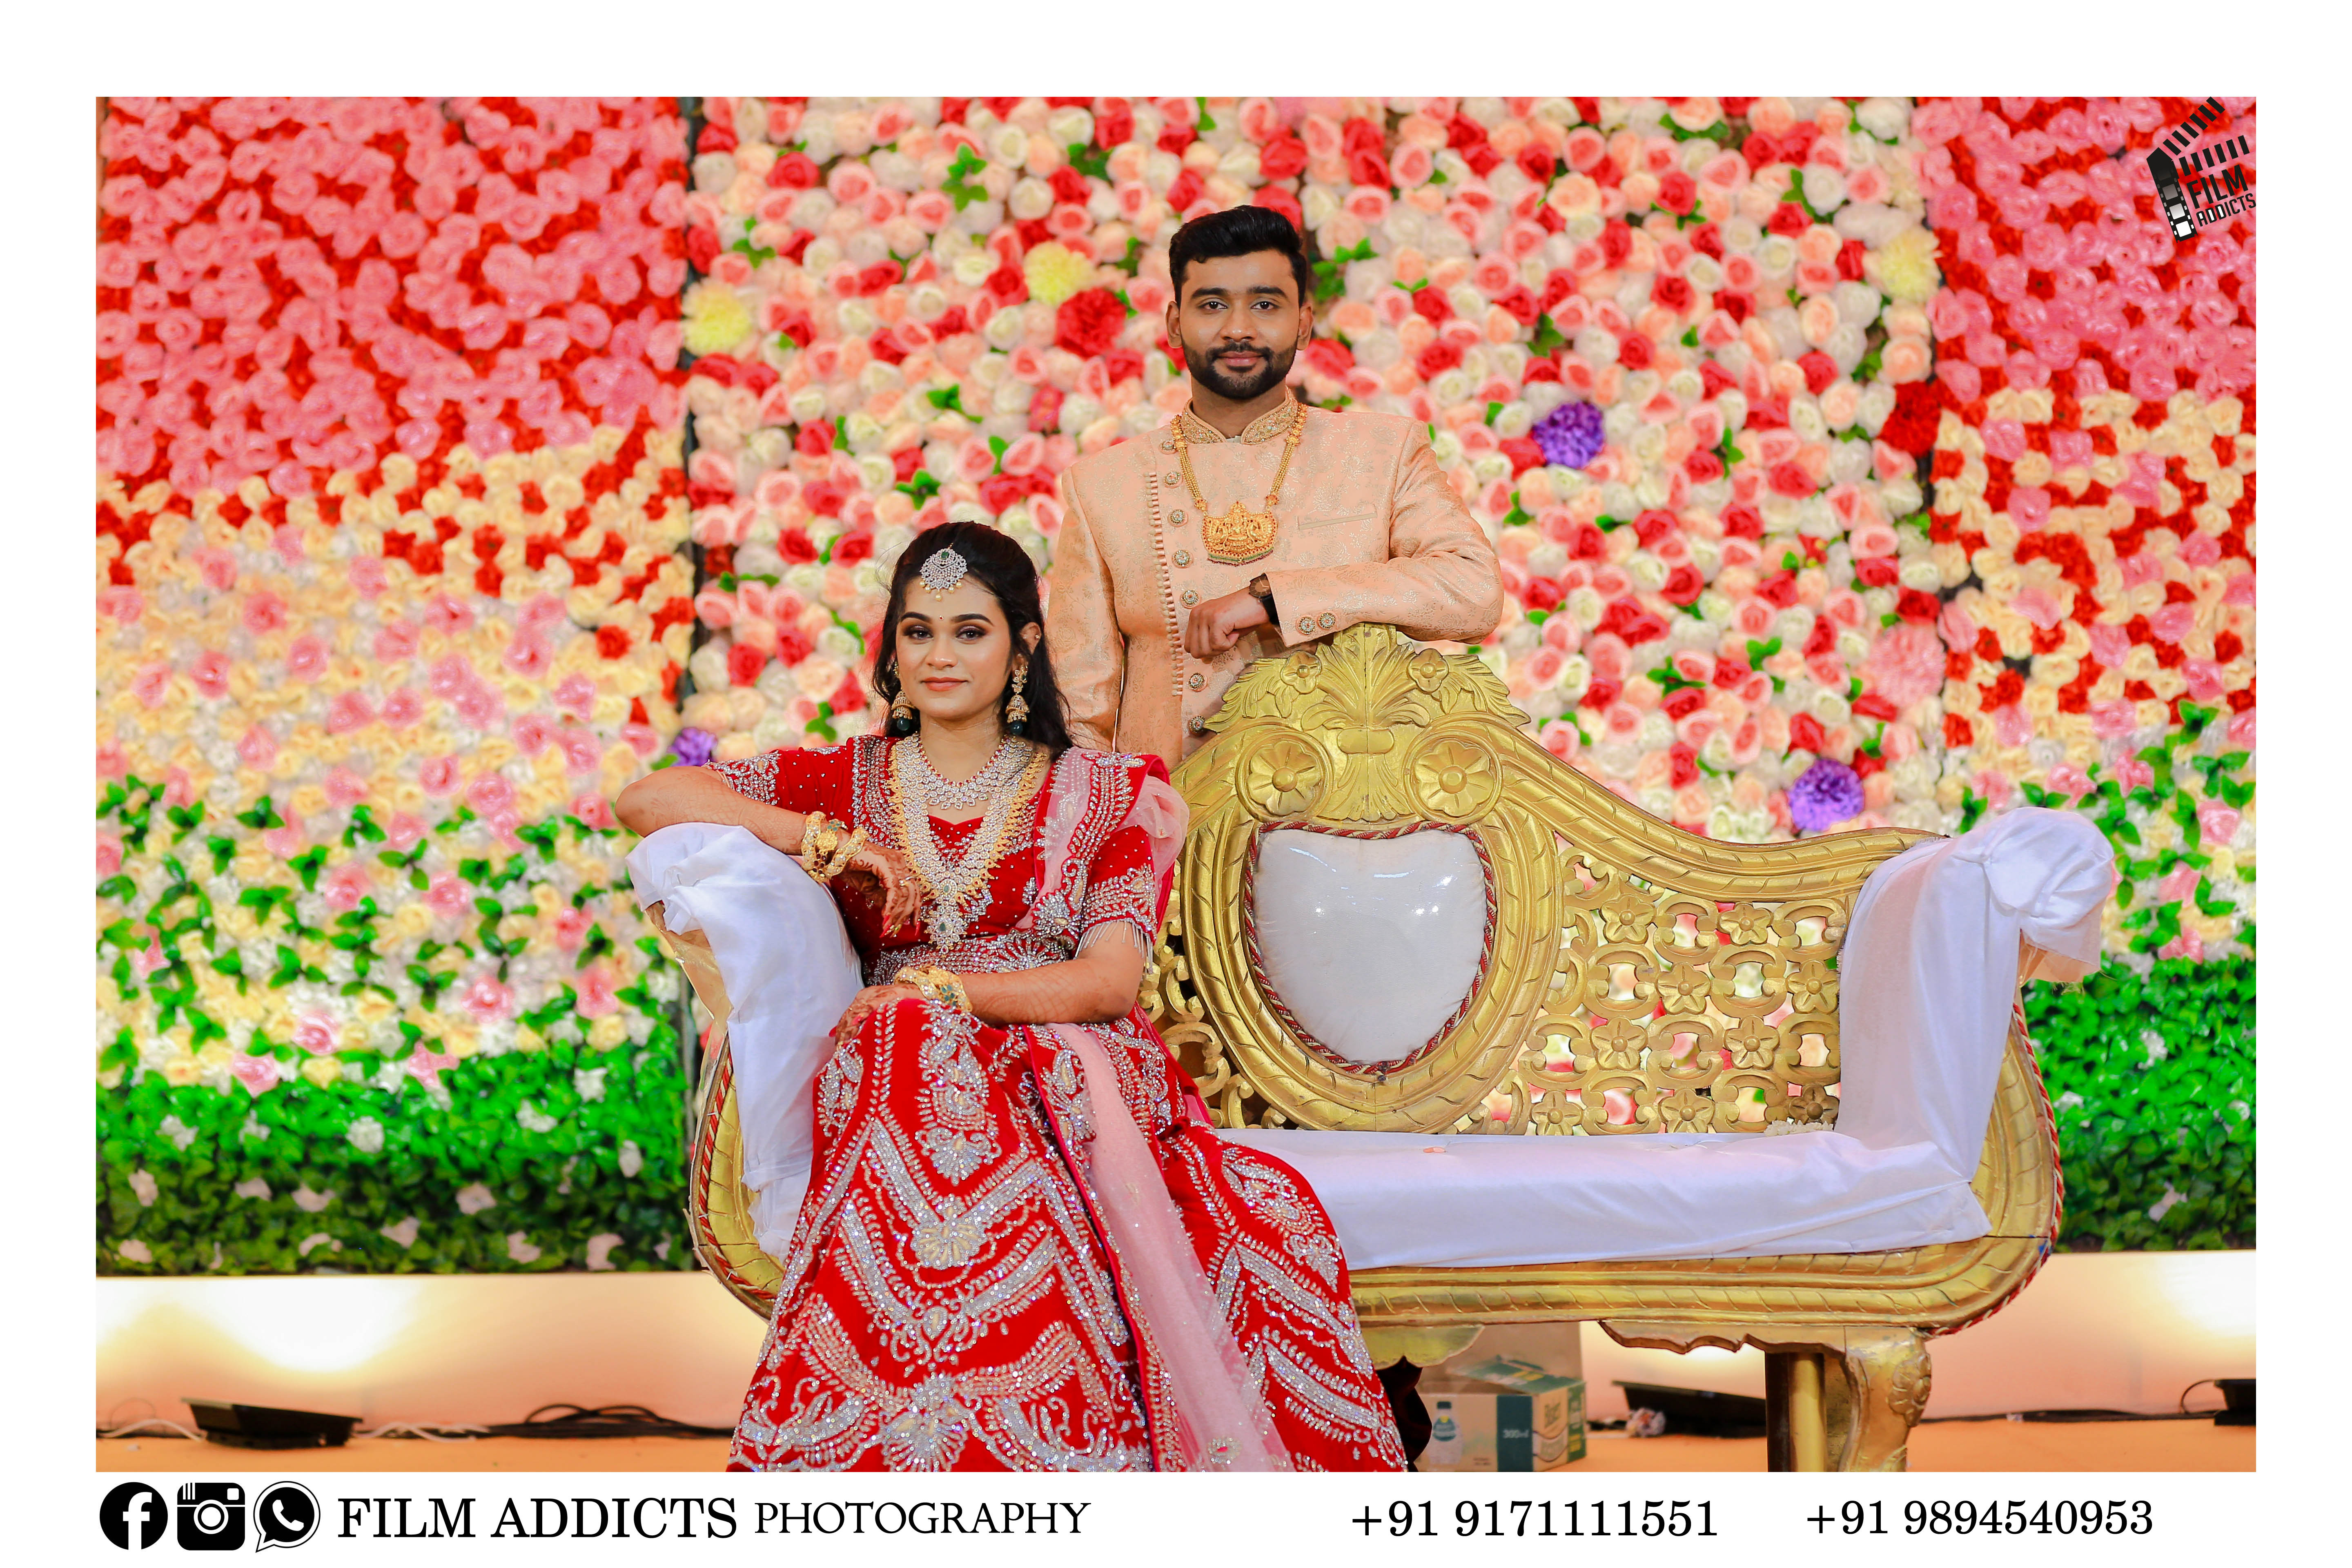 Best Candid Photographers in Sivaganga-FilmAddicts Photography, Best Candid photographers in sivagangai, Best wedding candid photographers in sivagangai, Best Photographers in sivagangai, Best Marraige photographers in sivagangai, Best wedding photography in sivagangai, Best wedding candid photography in sivagangai, Best Marraige photography in sivagangai, Best Photography in sivagangai, Best wedding video in sivagangai, Best wedding videography in sivagangai, Best Helicam operator in sivagangai, Best Drone Operator in sivagangai, Best wedding studio in sivagangai, Best proffesional photographers in sivagangai, No.1 Wedding Photographers in sivagangai, No.1 wedding photography in sivagangai, sivagangai wedding photographers, sivagangai wedding photography, sivagangai wedding Videos in sivagangai,Best Wedding photographers in Madurai, Best Candid photographers in Madurai, Best wedding candid photographers in Madurai, Best Photographers in Madurai,Best Marraige photographers in Madurai,Best wedding photography in Madurai, Best wedding candid photography in Madurai, Best Marraige photography in Madurai, Best Photography in Madurai, Best wedding video in Madurai, Best wedding videography in Madurai, Best Helicam operator in Madurai, Best Drone Operator in Madurai, Best wedding studio in Madurai, Best proffesional photographers in Madurai, No.1 Wedding Photographers in Madurai, No.1 wedding photography in Madurai, Madurai wedding photographers, Madurai wedding photography, Madurai wedding Videos in Madurai, Best Wedding photographers in TamilNadu.